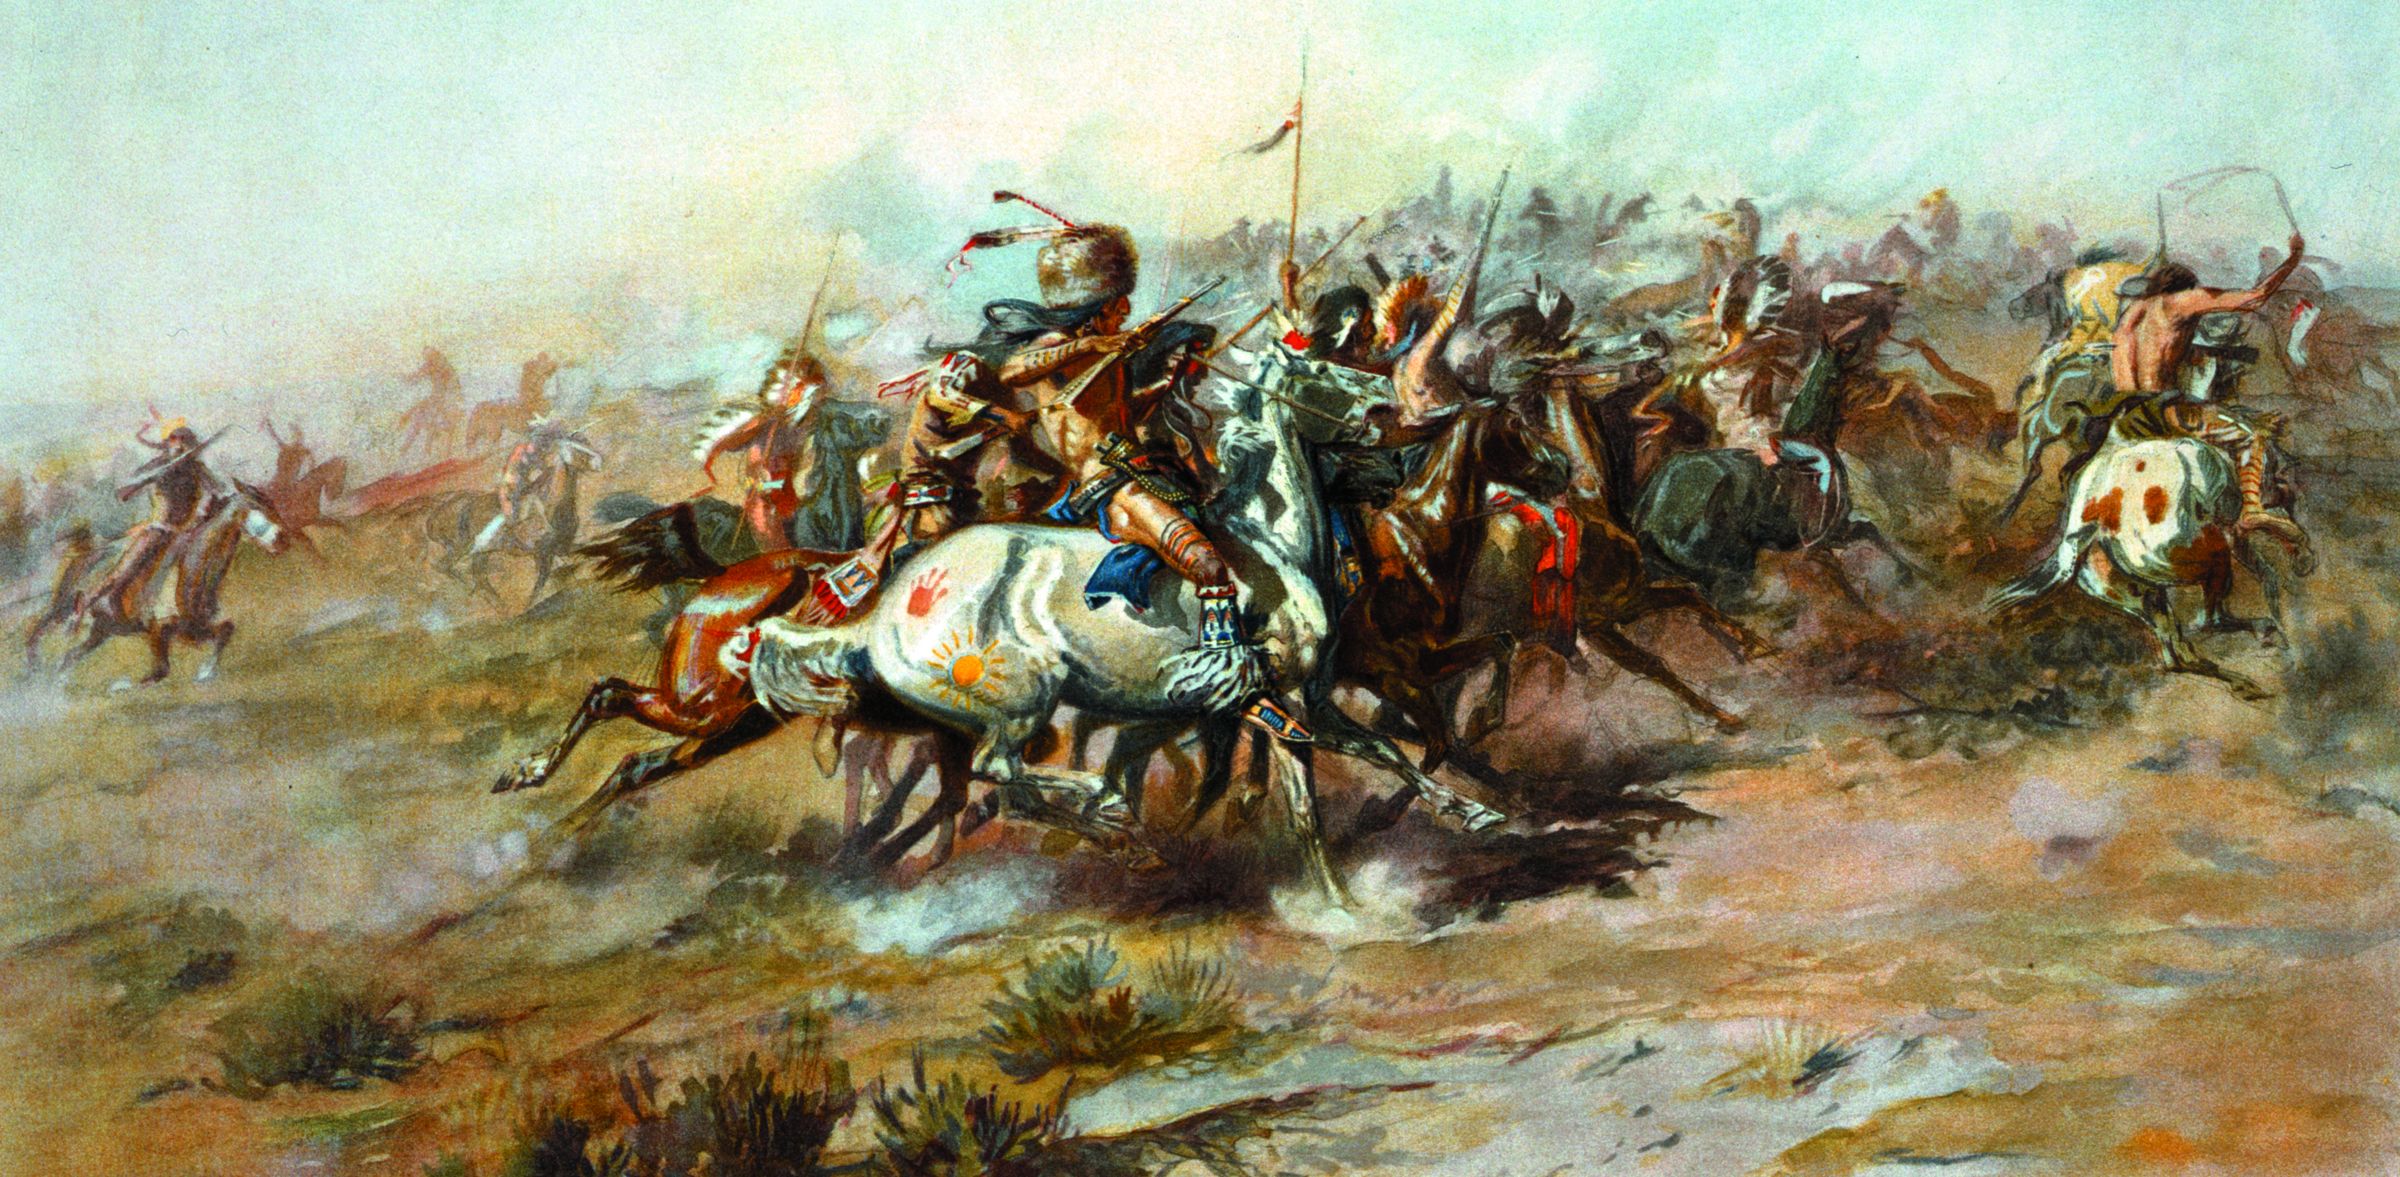 Lieutenant Colonel George Armstrong Custer and his men rode to their deaths at the Battle of Little Bighorn on June 15, 1876. Painting by C.M. Russell, 1903.